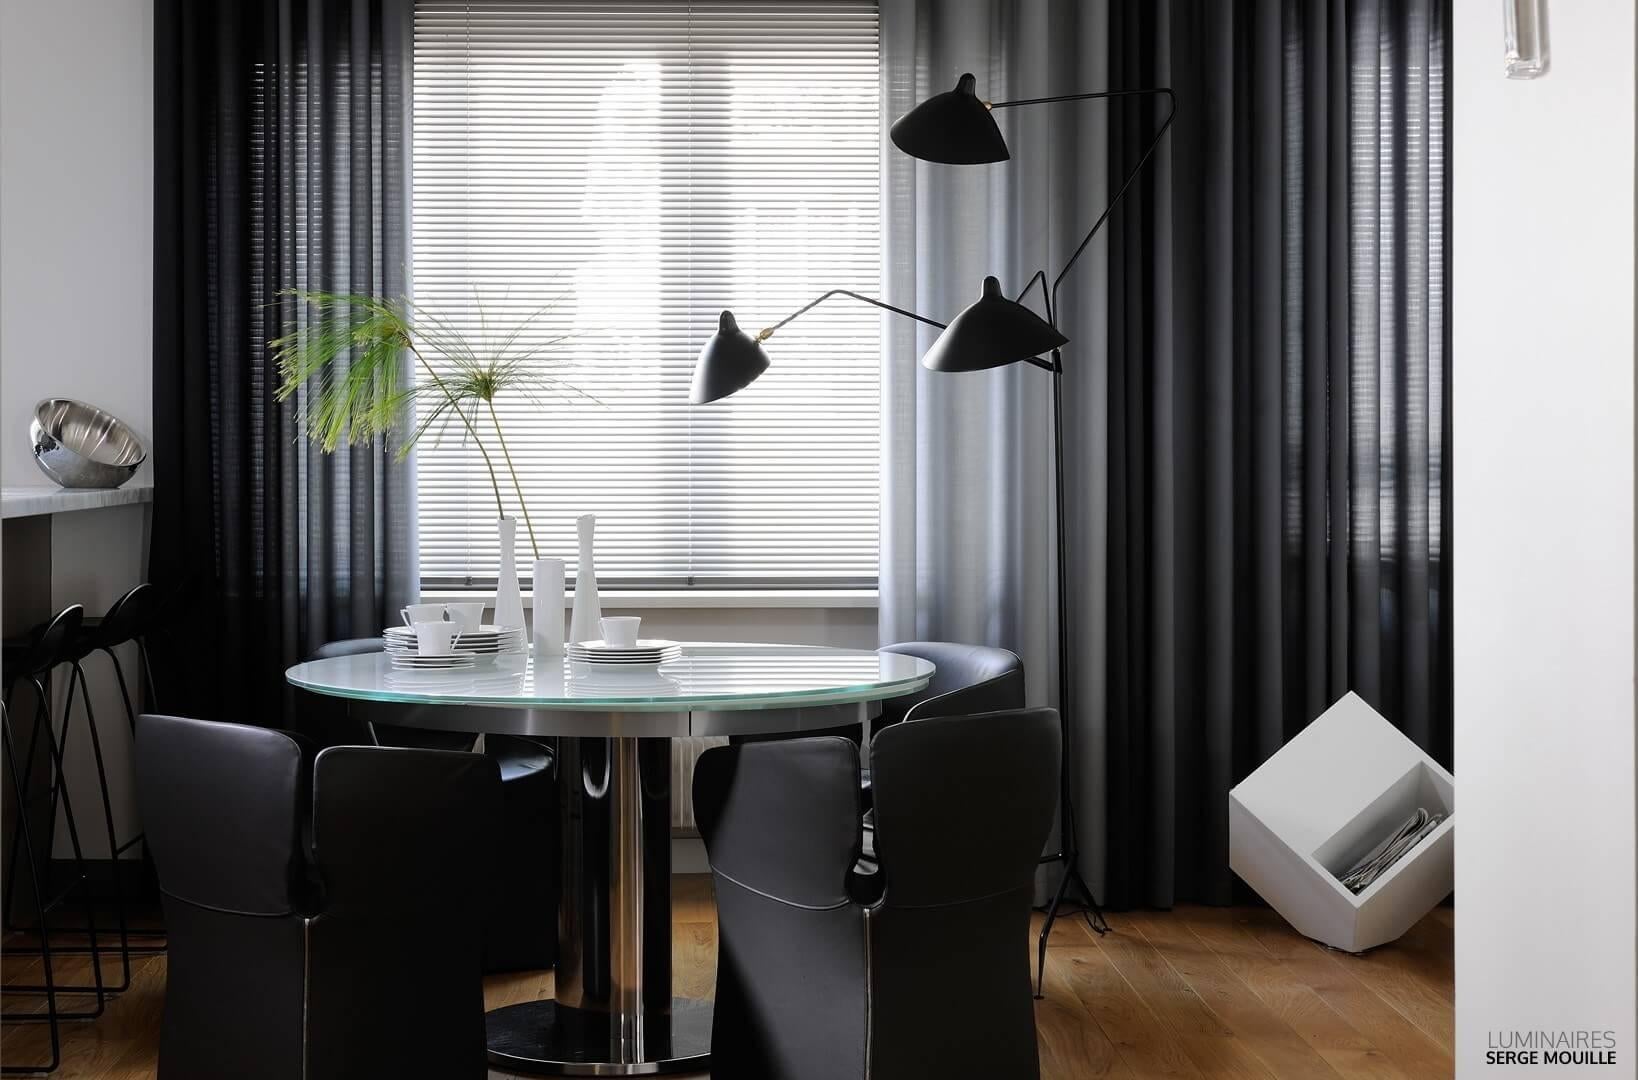 Aluminum Serge Mouille - Floor Lamp with Three Arms in Black - IN STOCK! For Sale